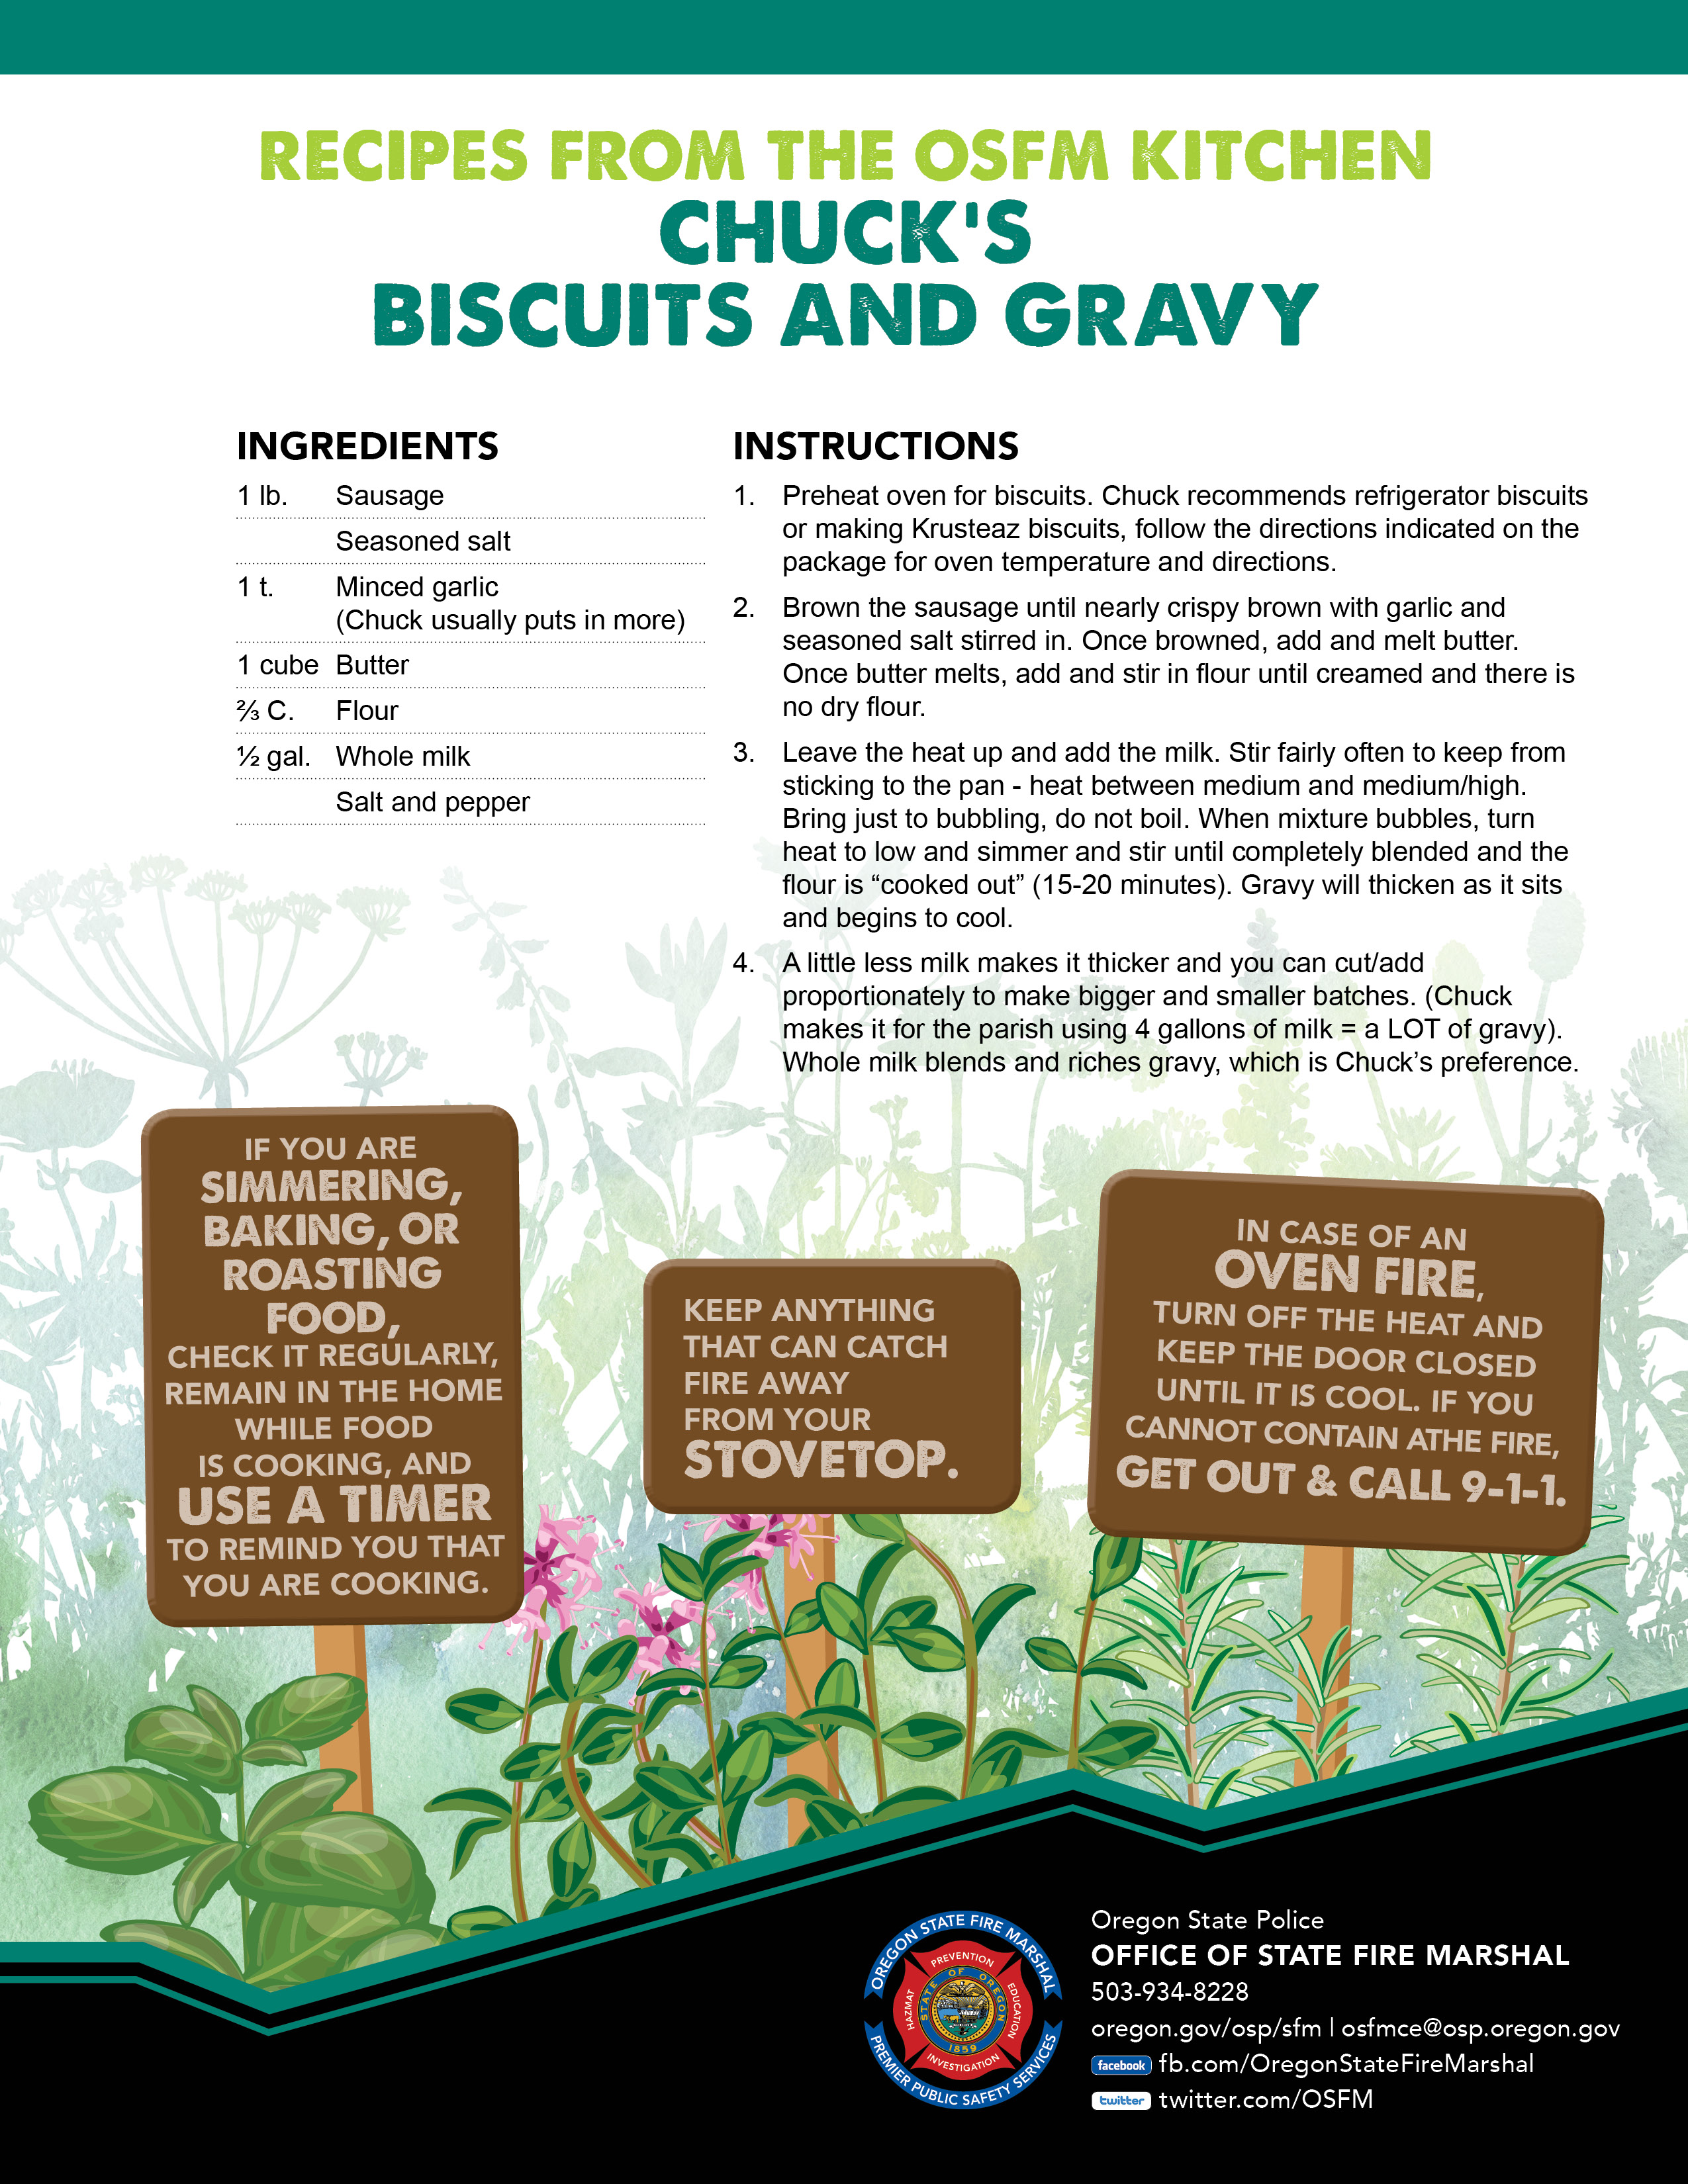 CookingSafety-Recipes-BiscuitsGravy.jpg